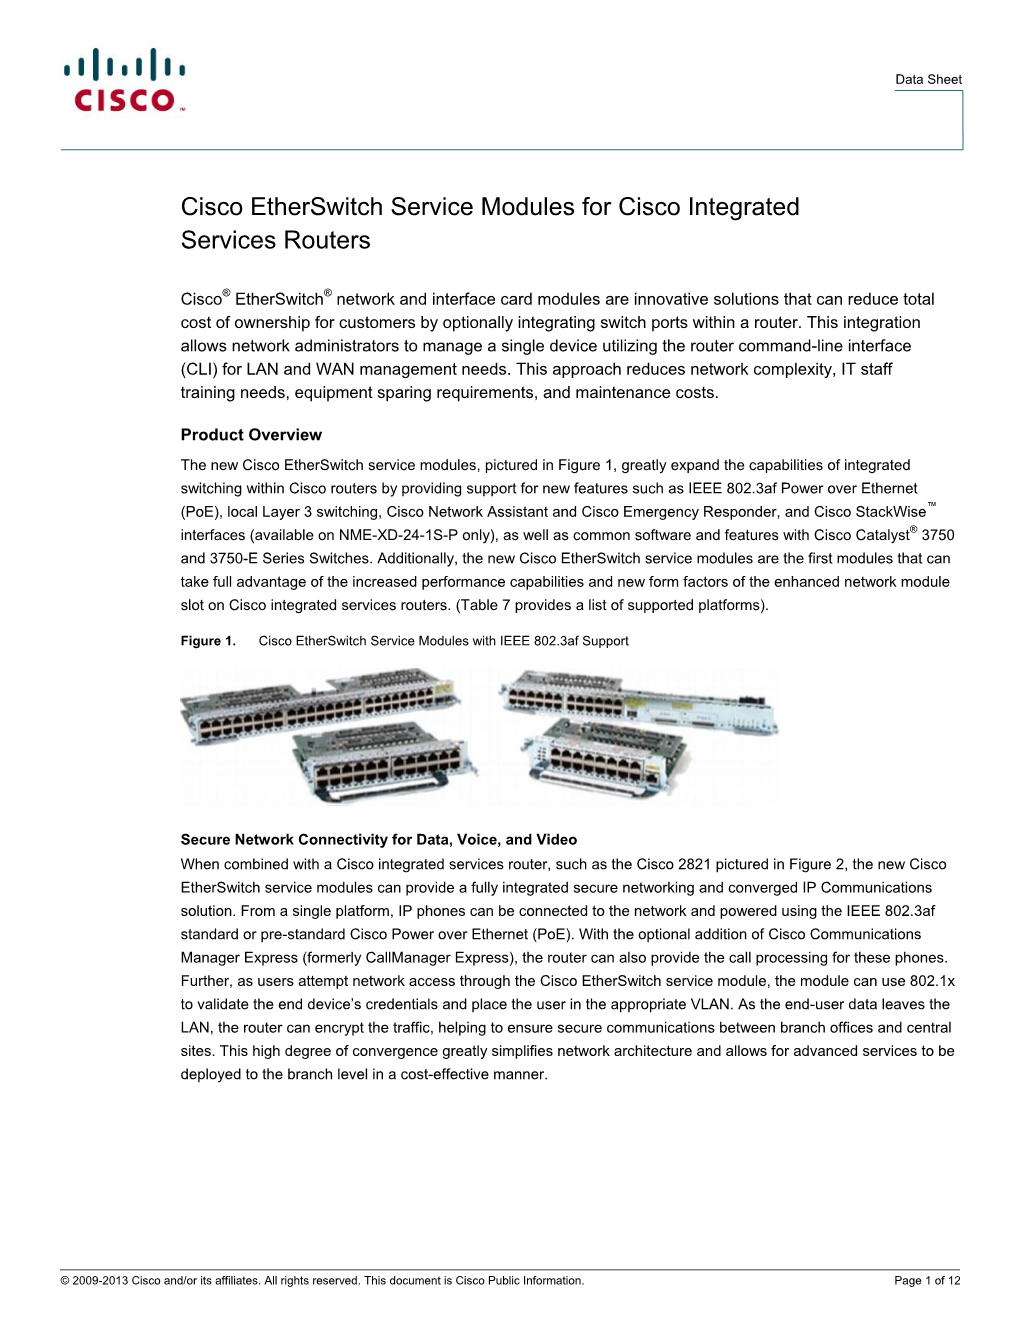 Cisco Etherswitch Service Modules for Cisco Integrated Services Routers